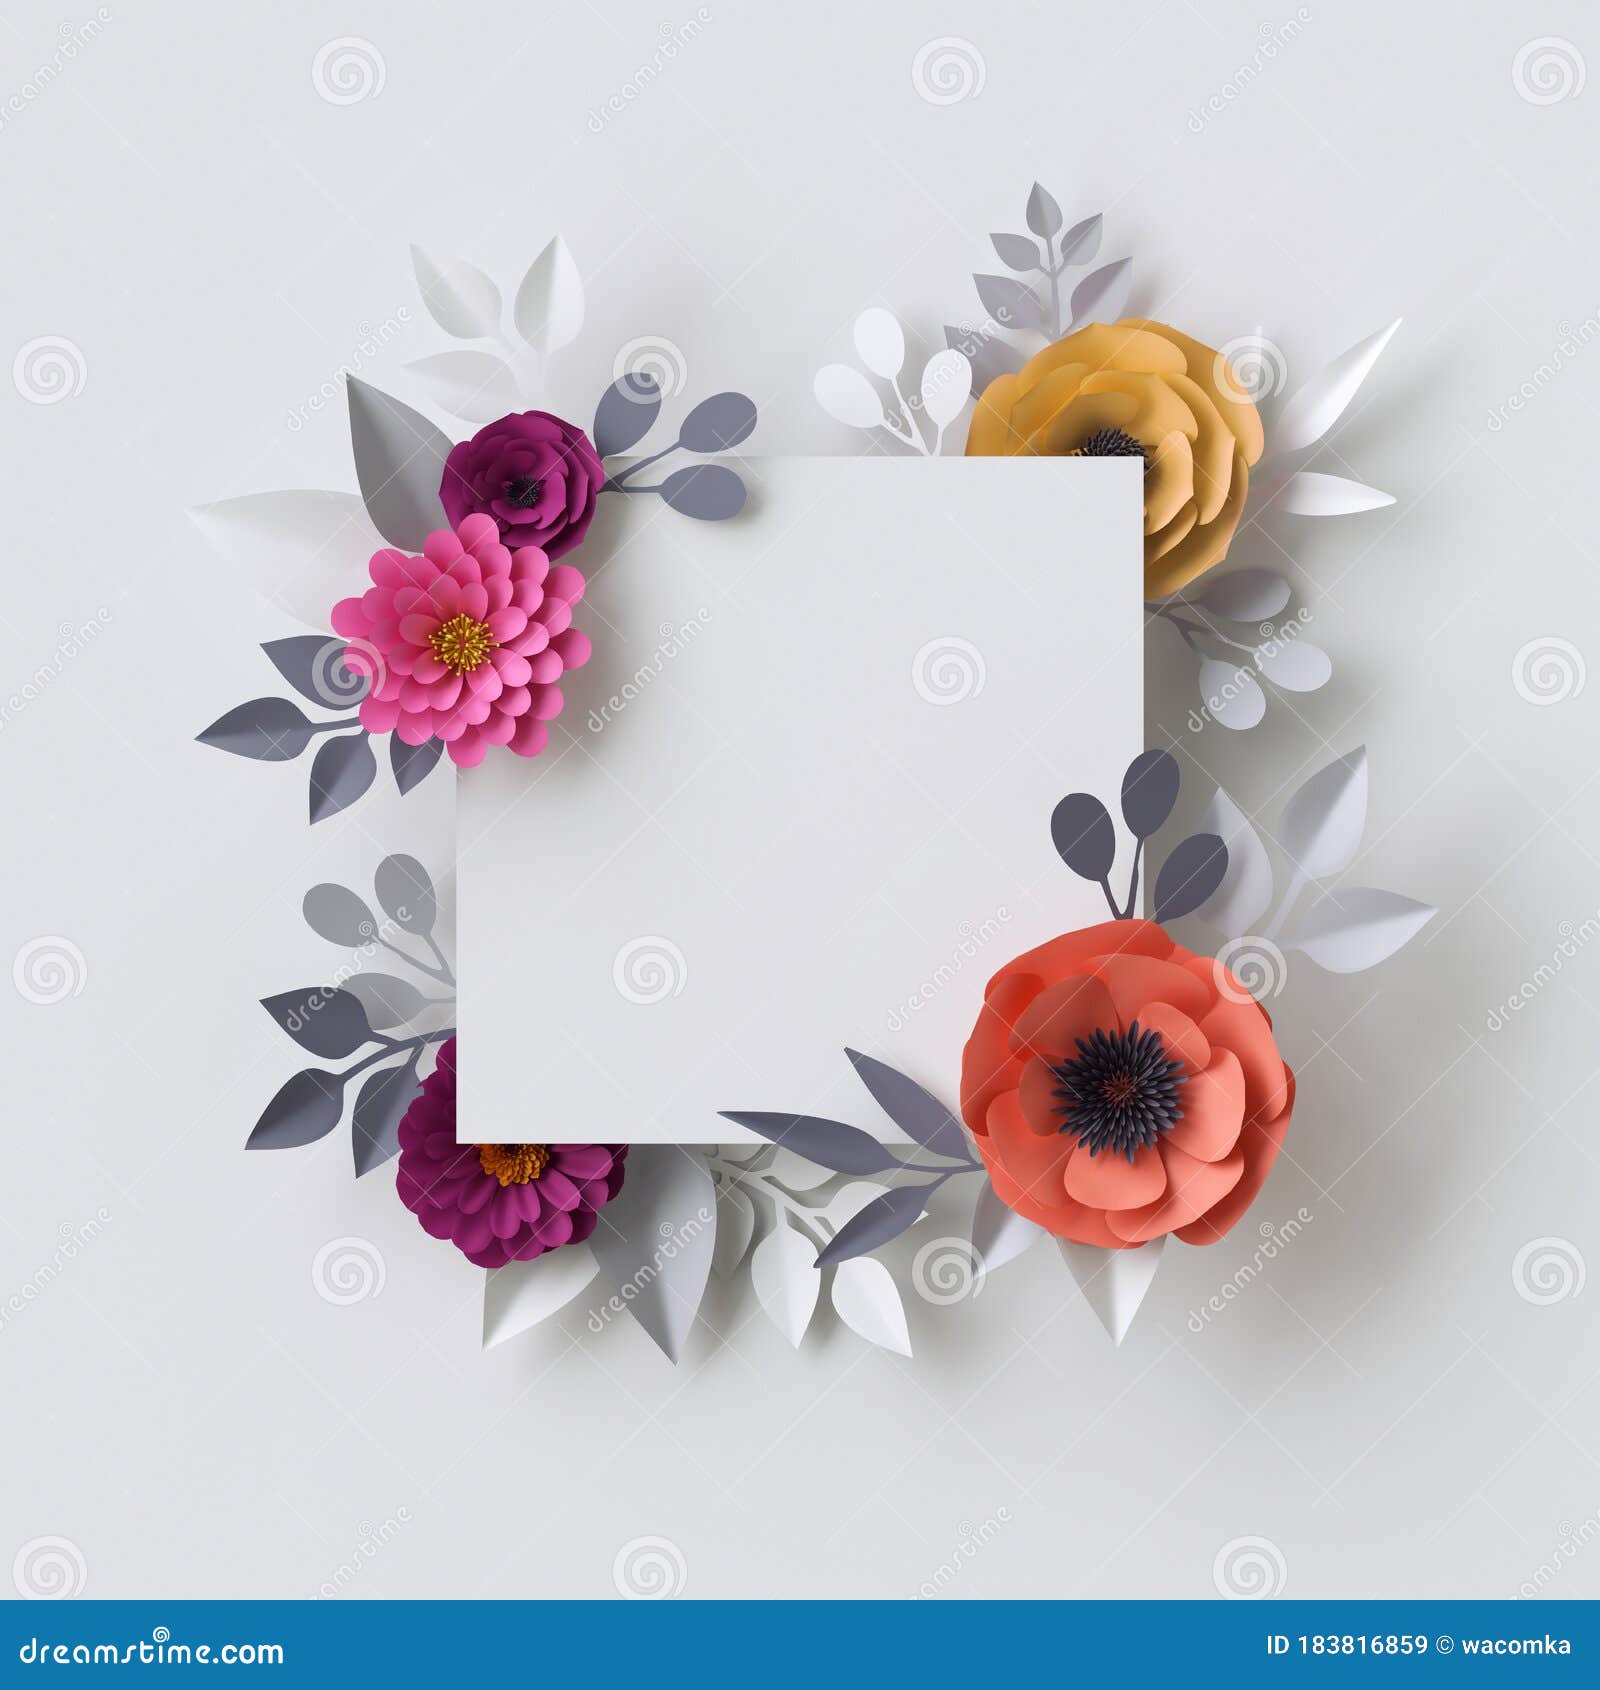 3d Render, Abstract Paper Flowers, Floral Background, Blank Square Frame,  Greeting Card Template Stock Illustration - Illustration of circle,  background: 183816859